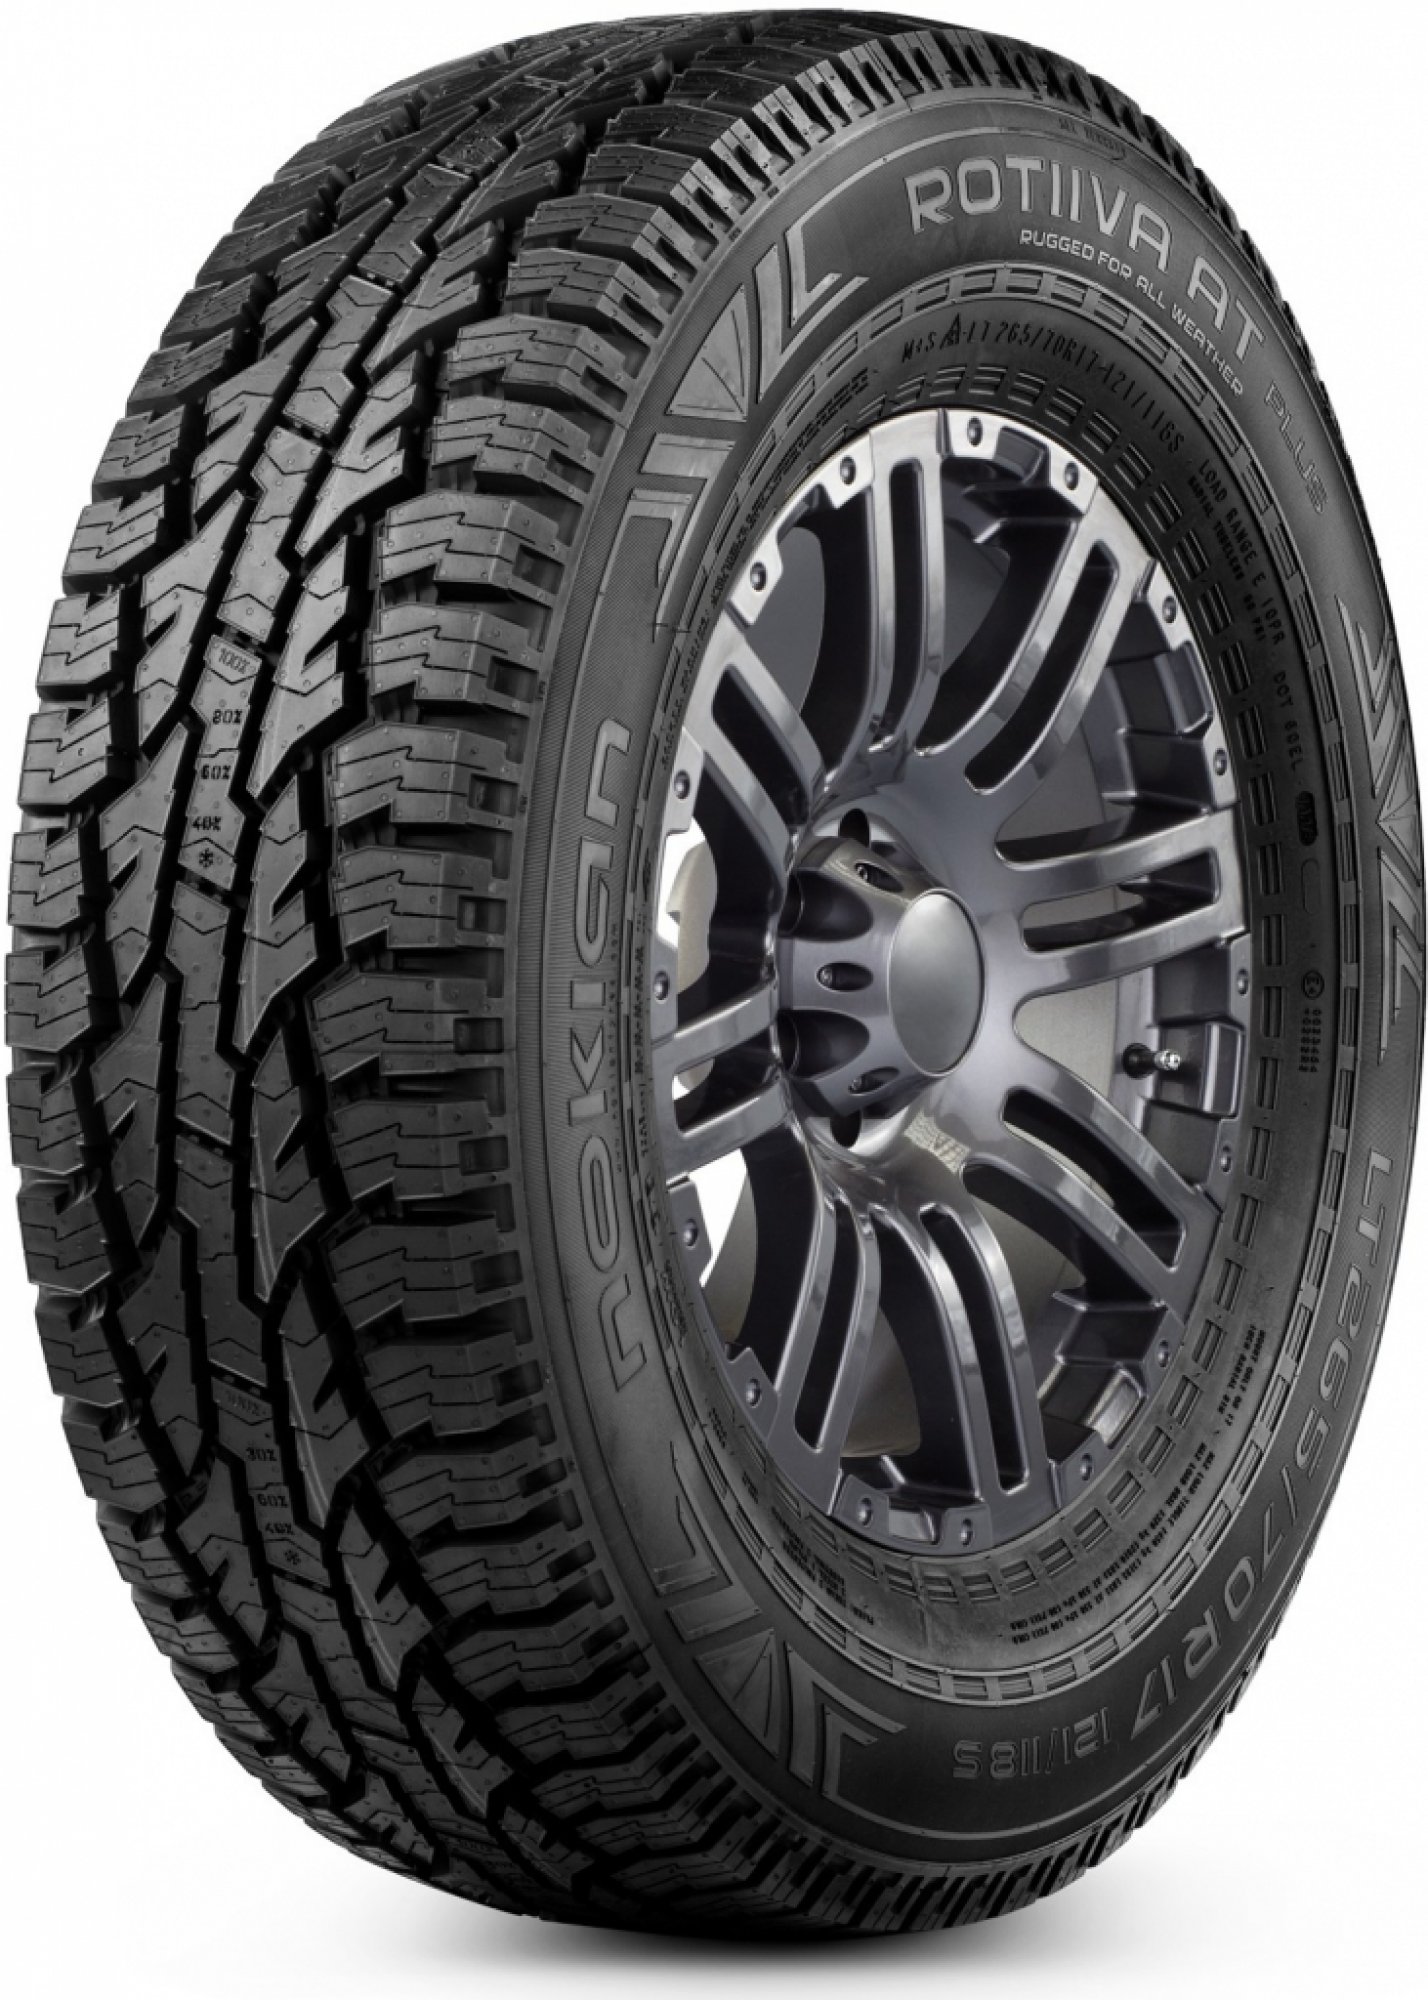 NOKIAN TYRES ROTIIVA AT PLUS 315/70 R 17 121/118S